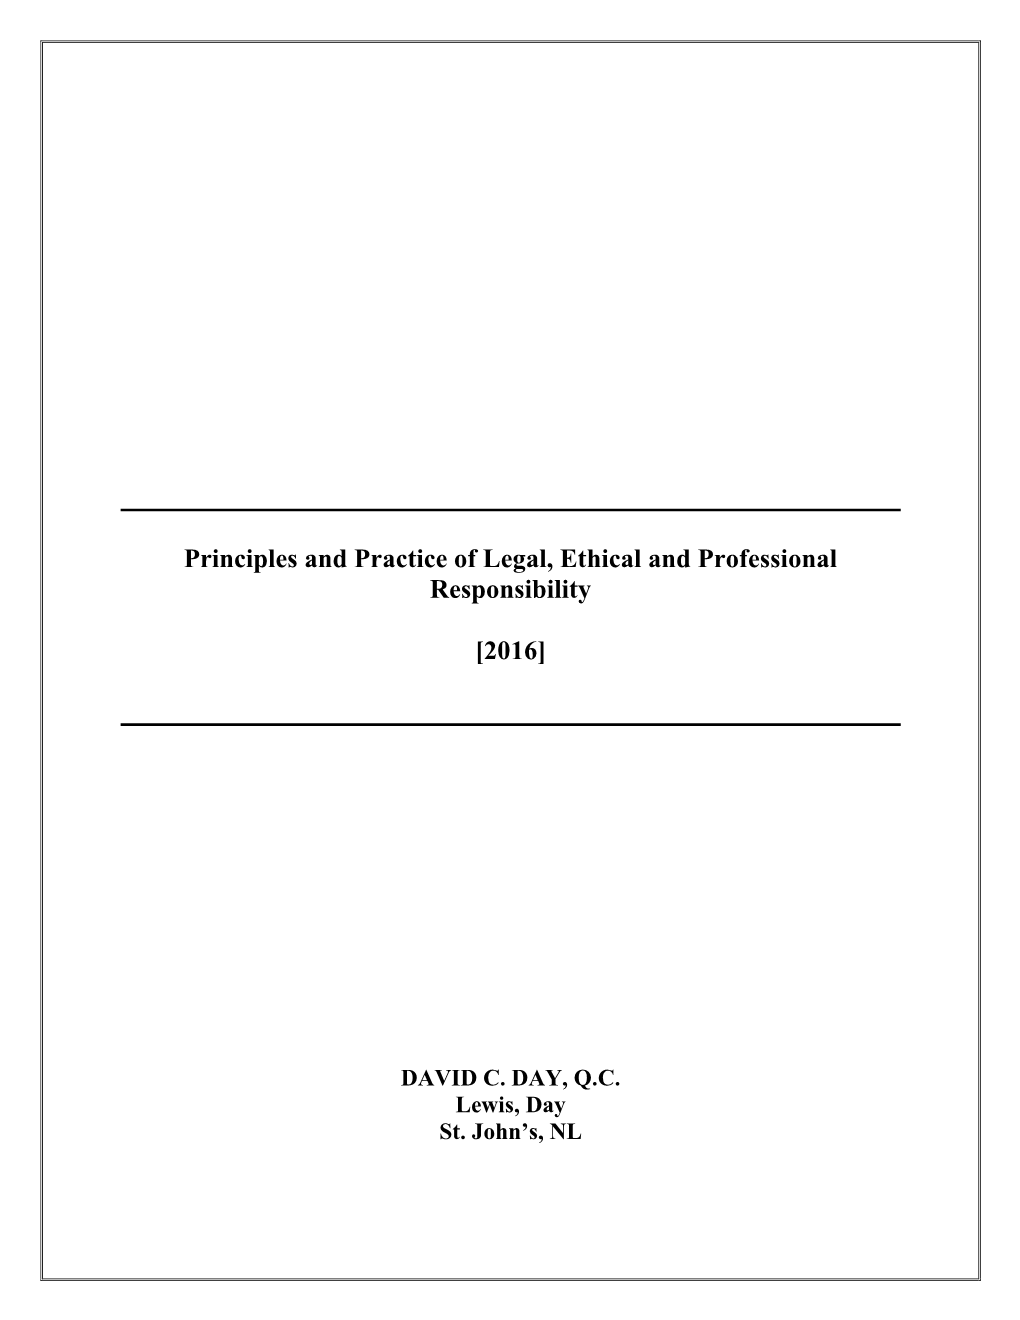 Principles and Practice of Legal, Ethical and Professional Responsibility